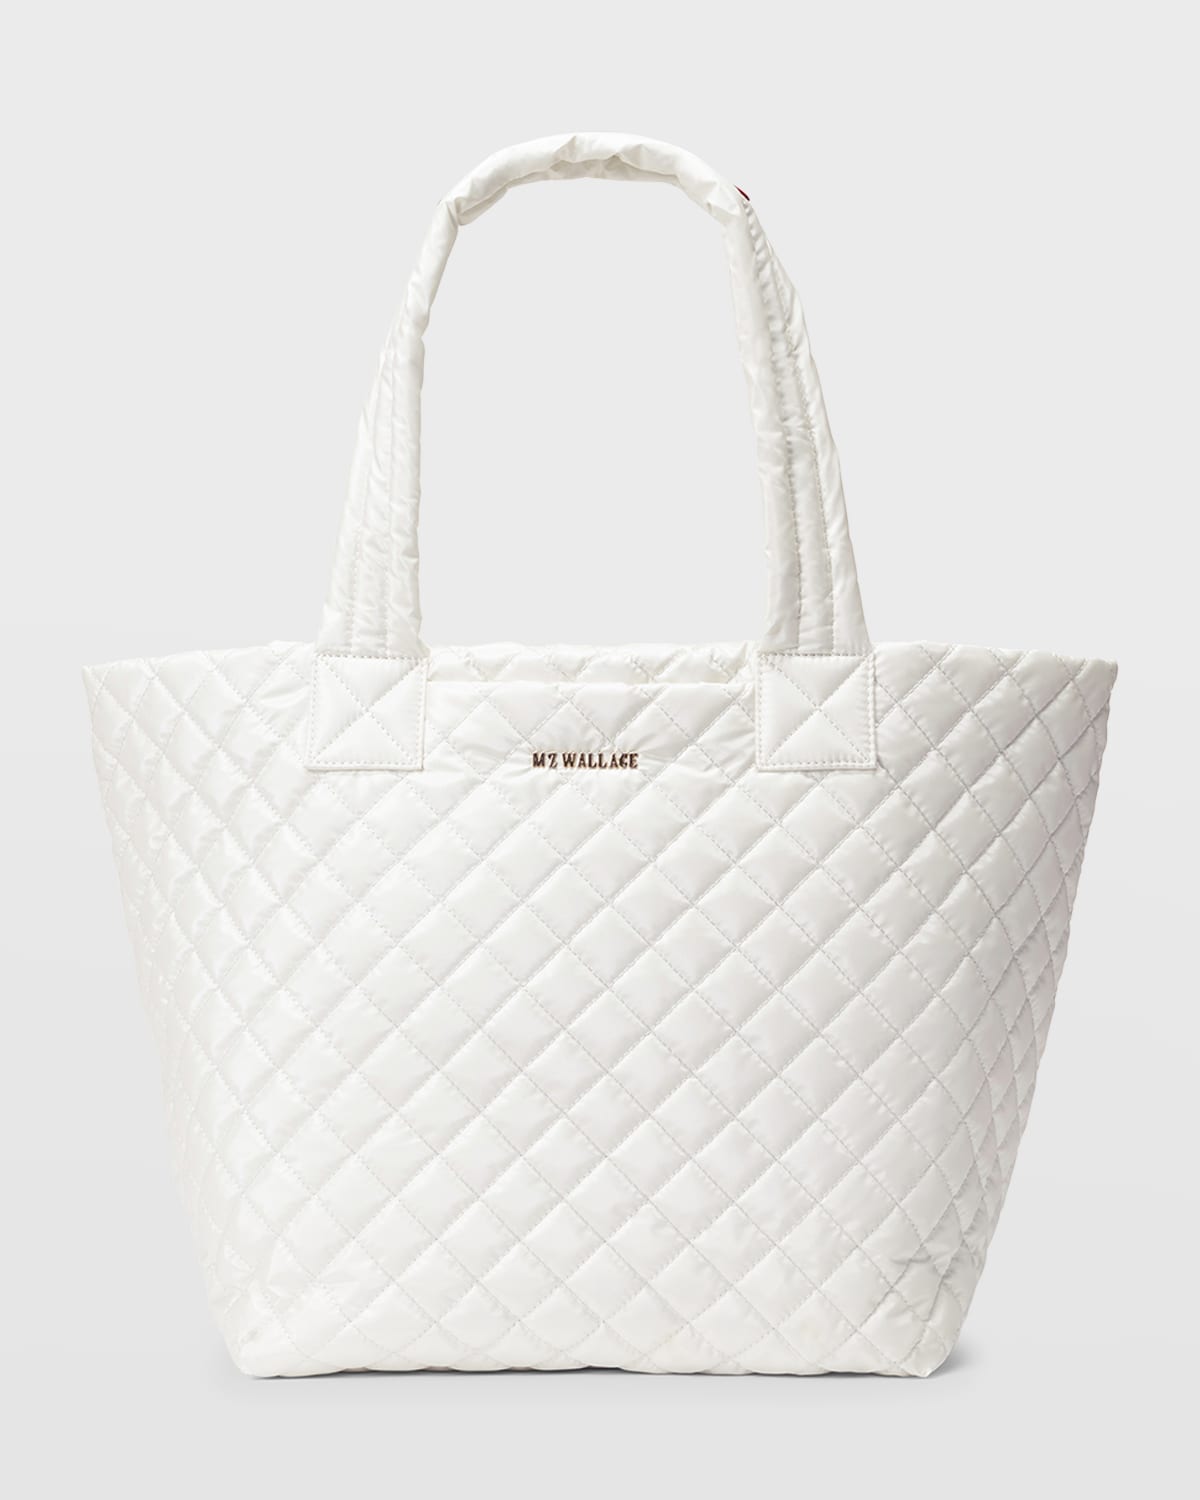 MZ WALLACE METRO DELUXE MEDIUM QUILTED NYLON TOTE BAG